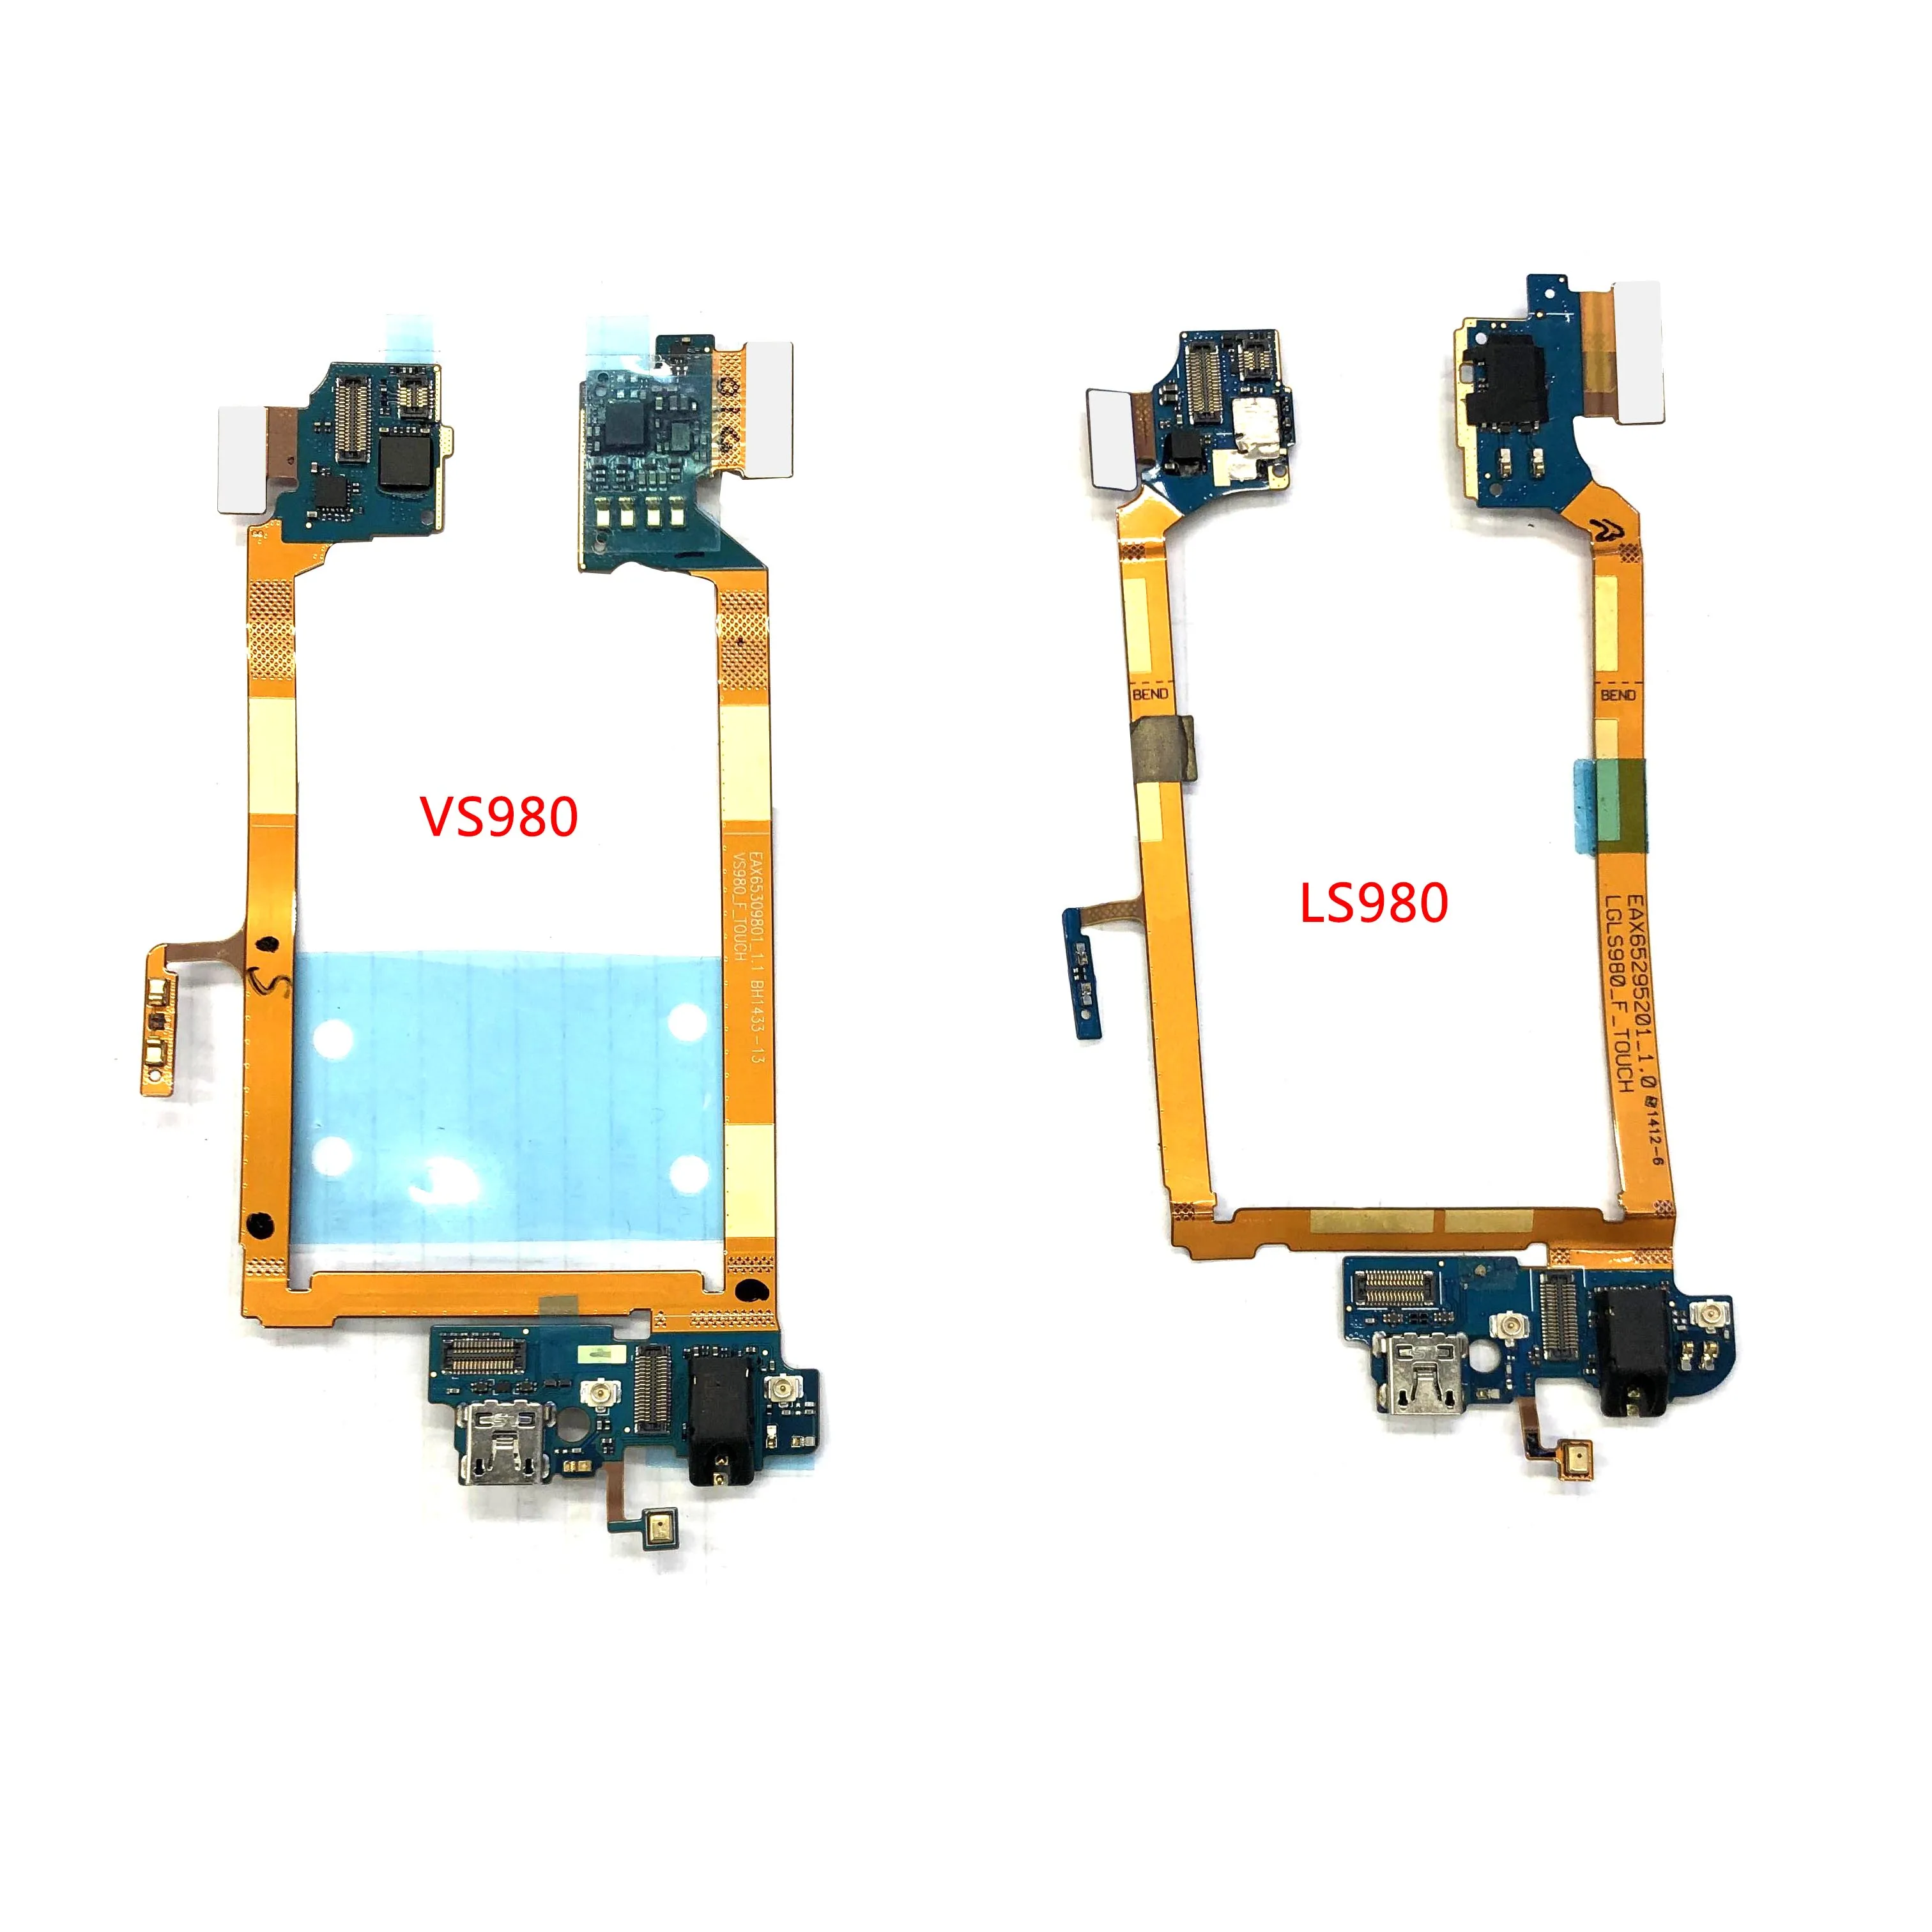 For LG G2 D802 D805 VS980 USB Charging Dock Connector Port Flex Cable Microphone Headphone Jack Power on/off Button